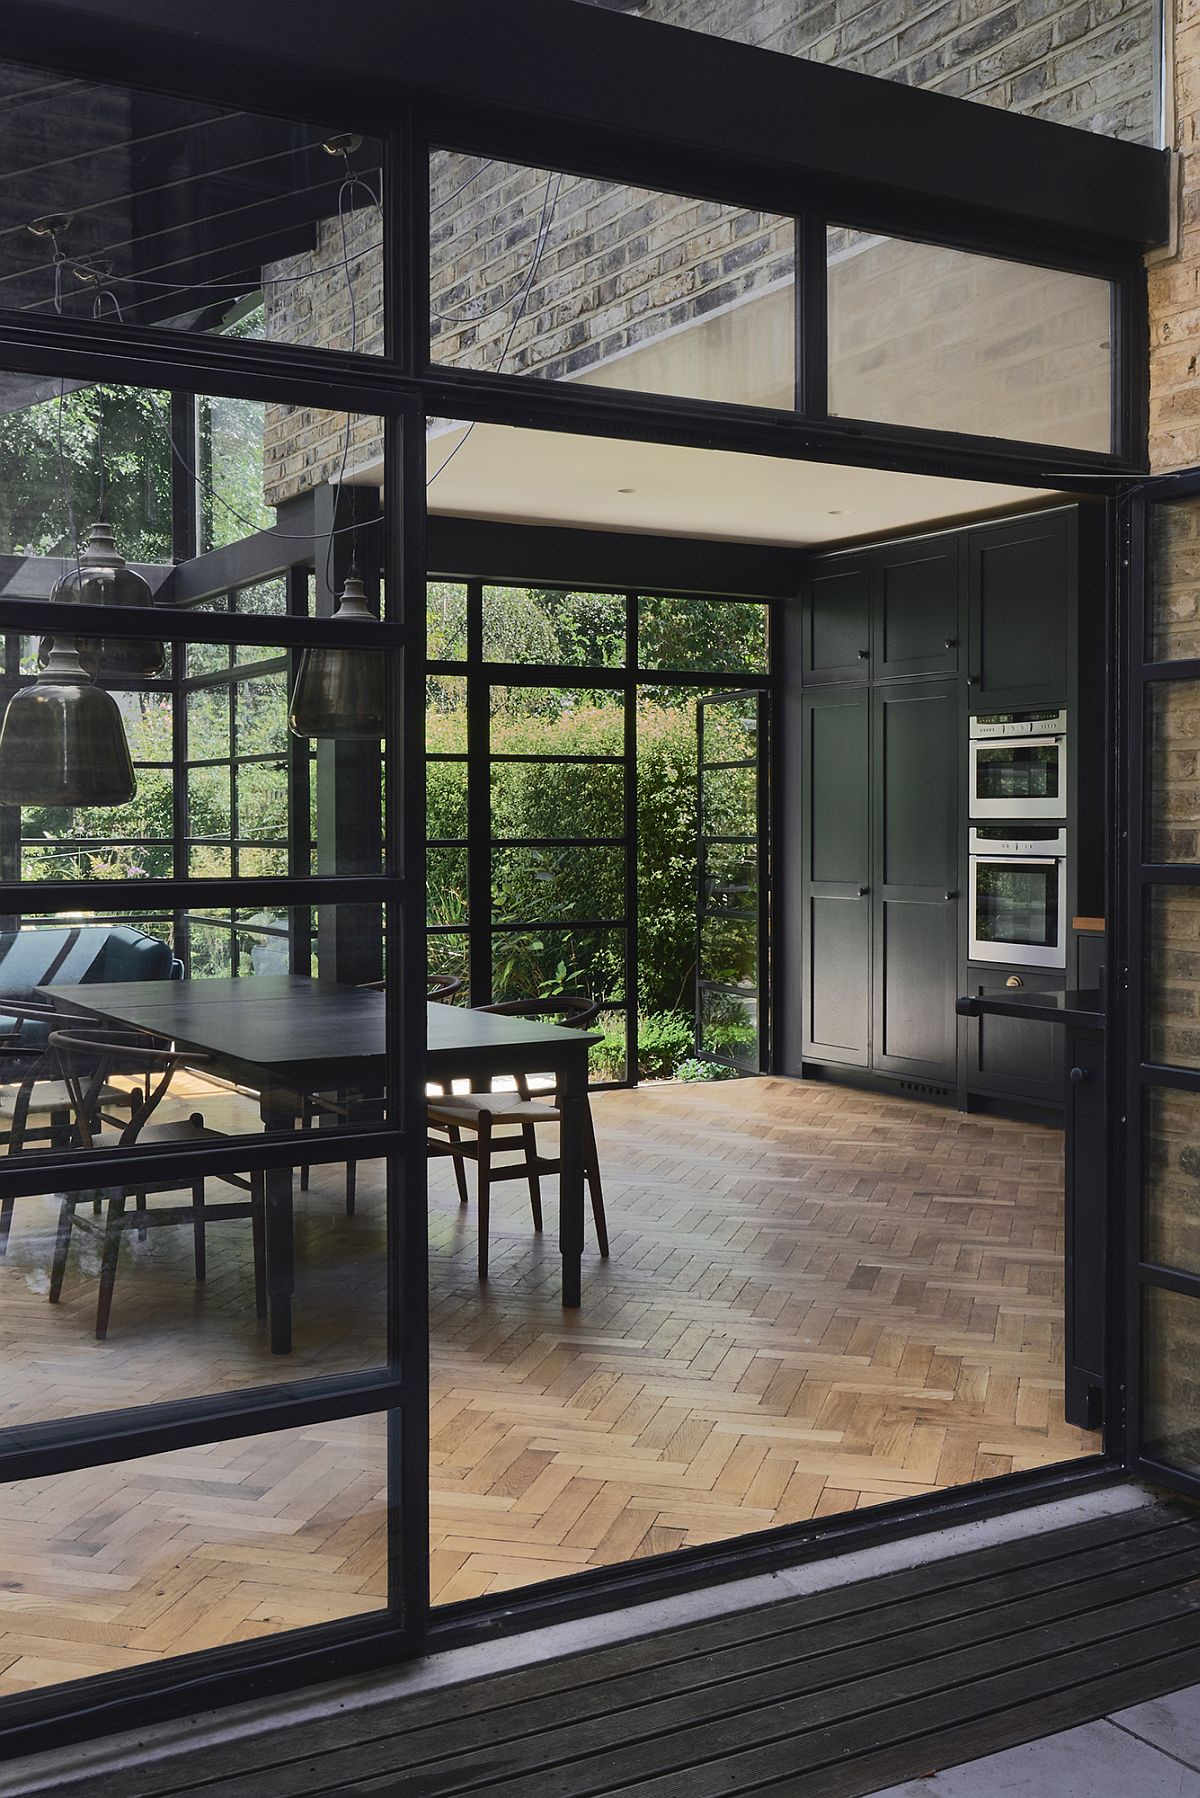 Crittall windows and doors shape the stylish contemporary extension